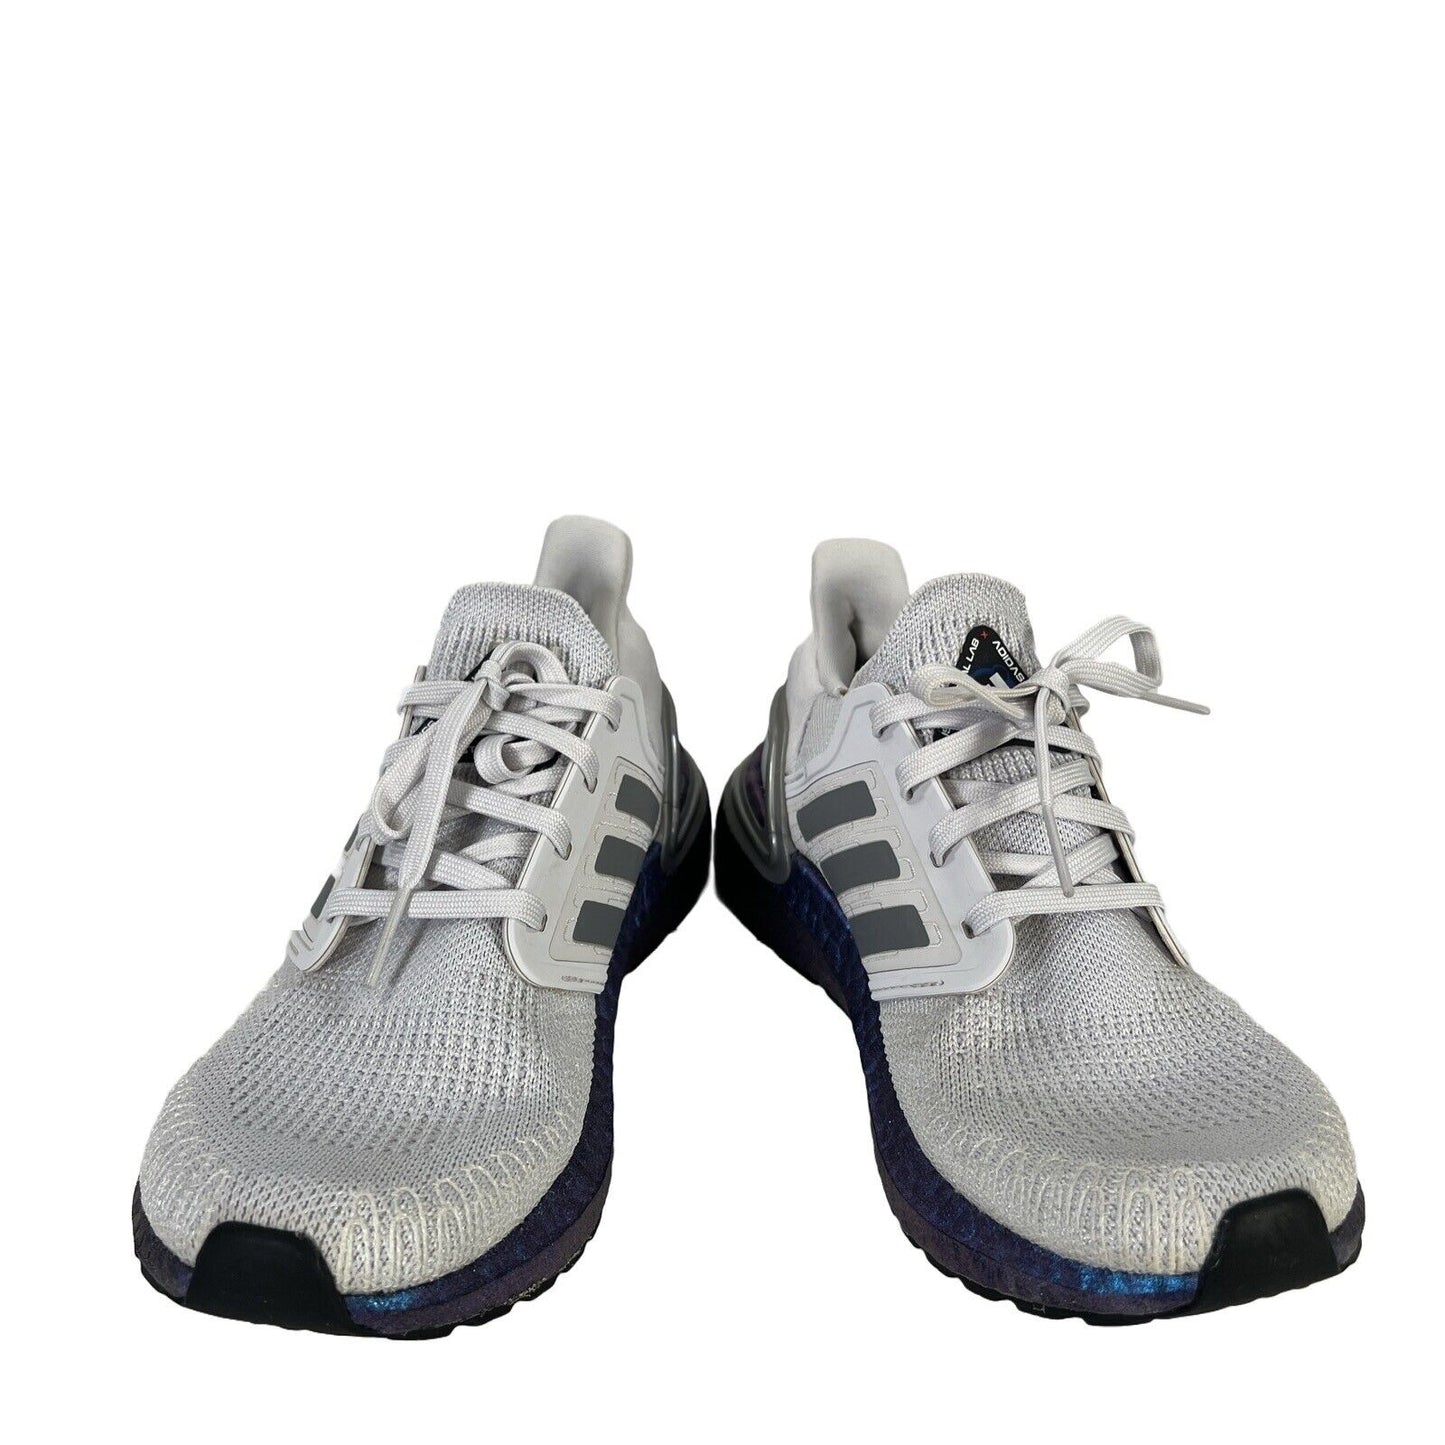 Adidas Women's Gray/Purple Ultraboost 20 Dash Lace Up Running Shoes - 7